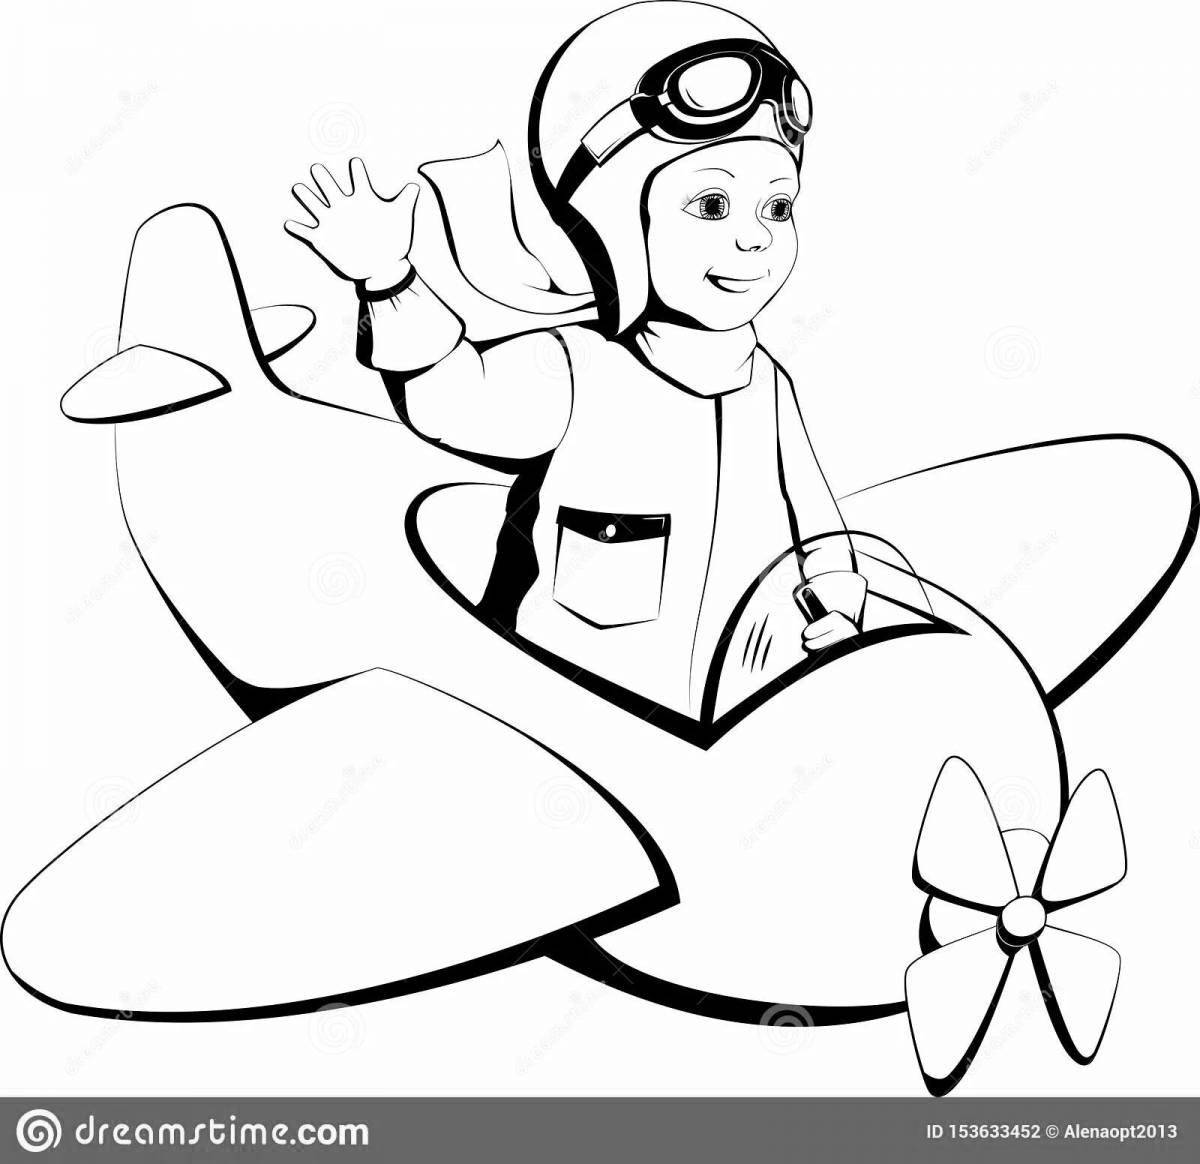 Bright pilot coloring for toddlers